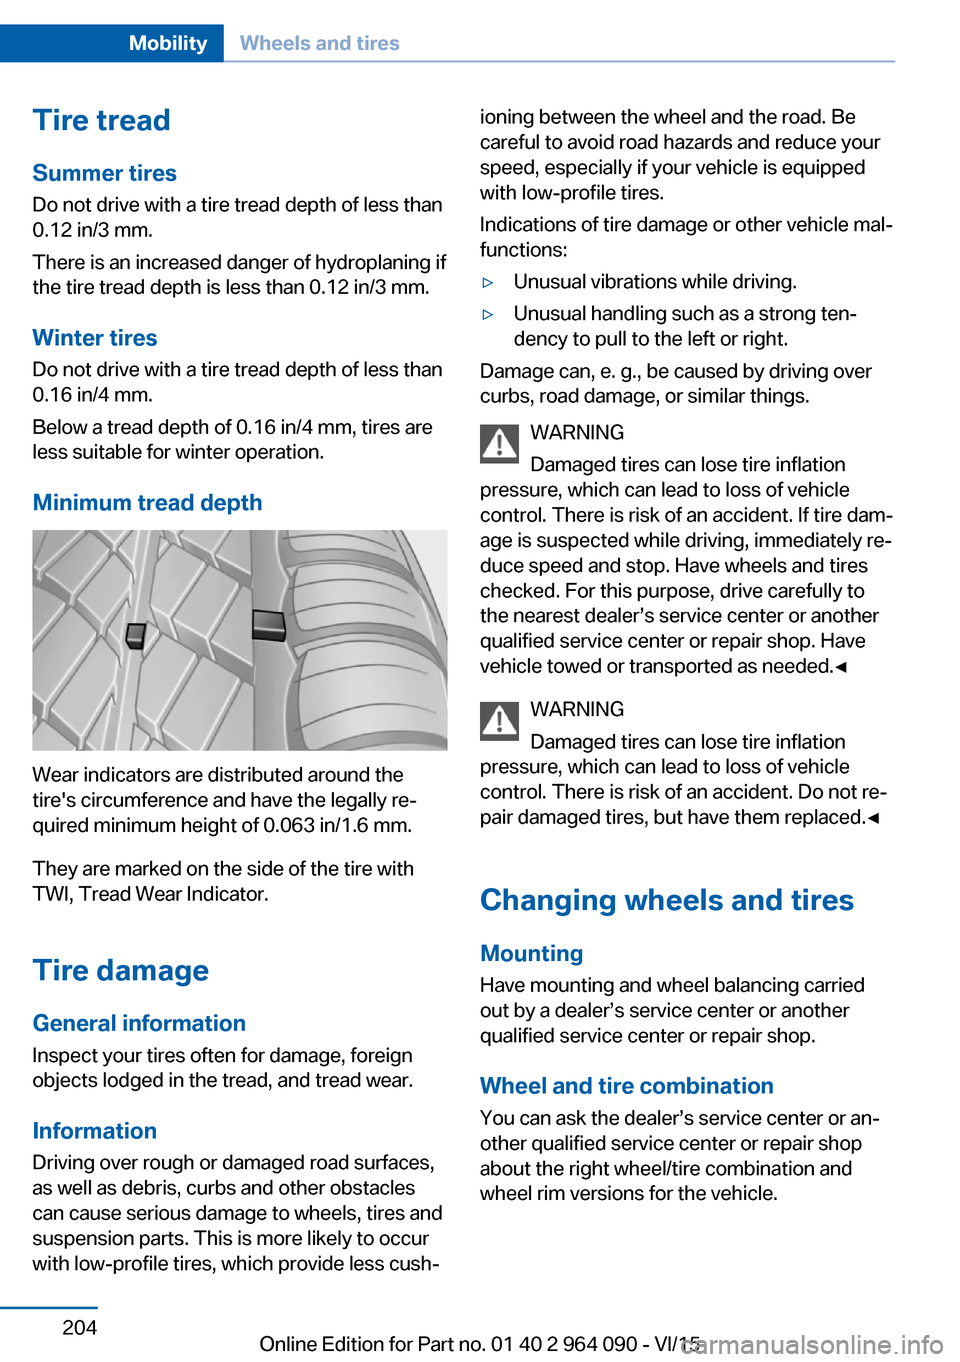 BMW X6M 2015 F86 Owners Manual Tire treadSummer tires
Do not drive with a tire tread depth of less than
0.12 in/3 mm.
There is an increased danger of hydroplaning if
the tire tread depth is less than 0.12 in/3 mm.
Winter tires
Do n